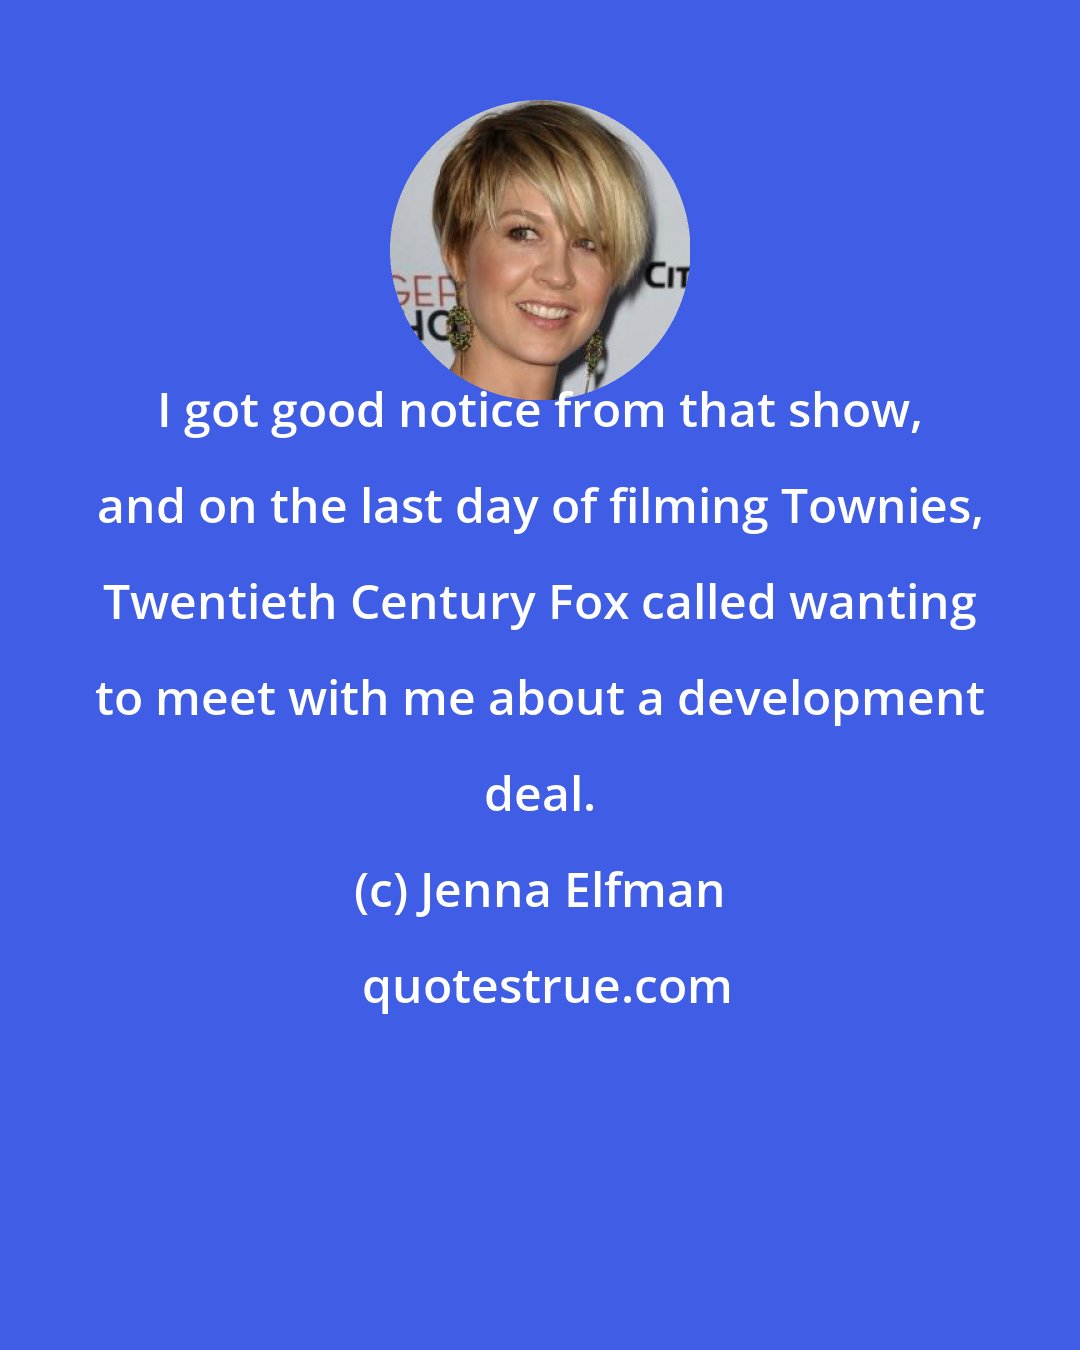 Jenna Elfman: I got good notice from that show, and on the last day of filming Townies, Twentieth Century Fox called wanting to meet with me about a development deal.